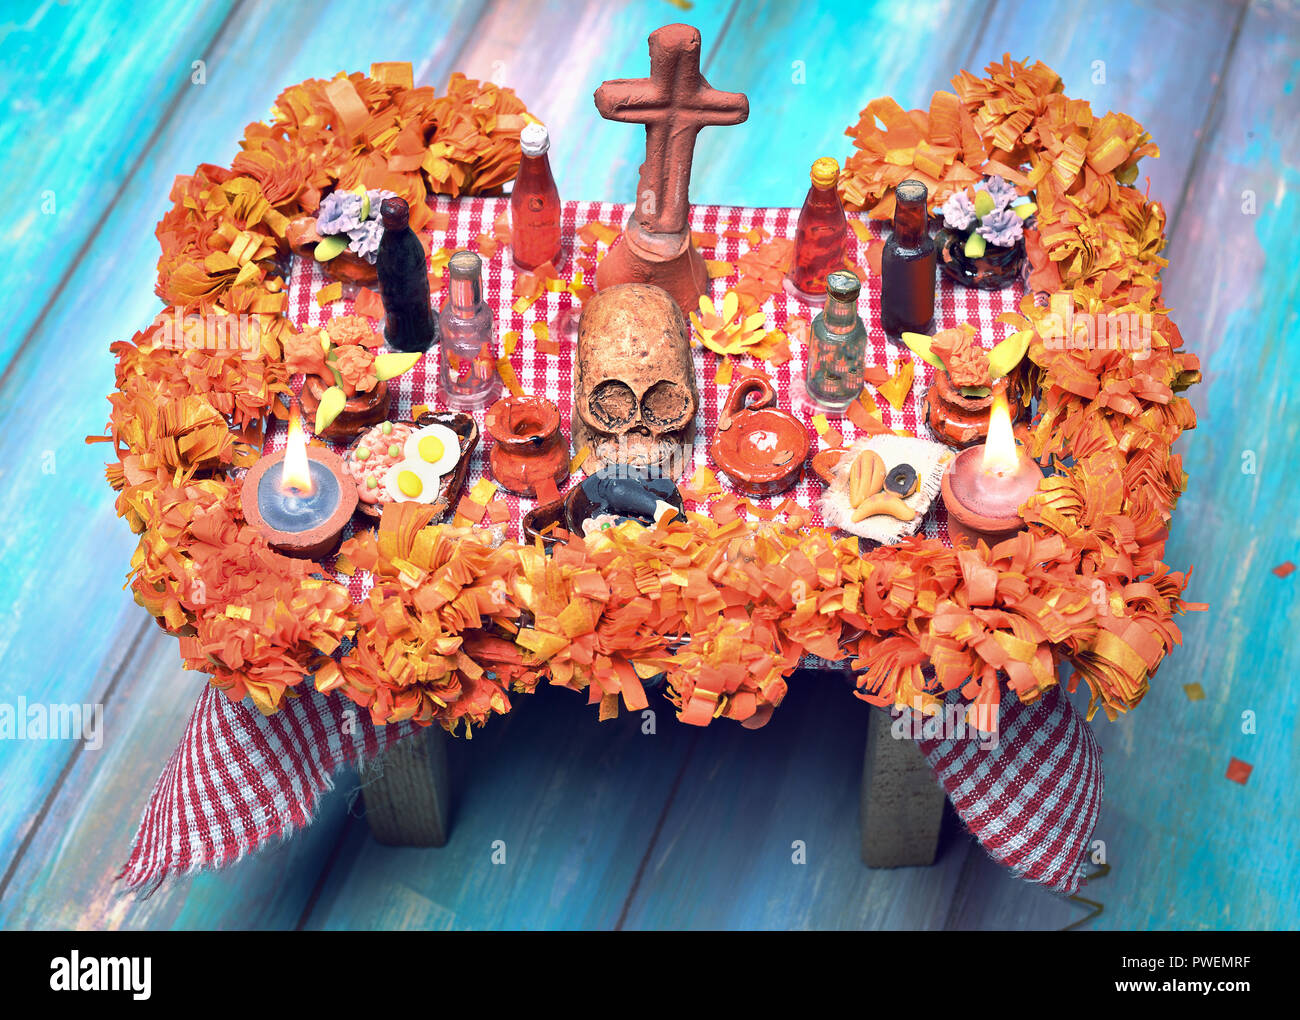 Mexican Day of the dead altar with skull, pan de muerto, drinks, cempasuchil flowers and candles Stock Photo